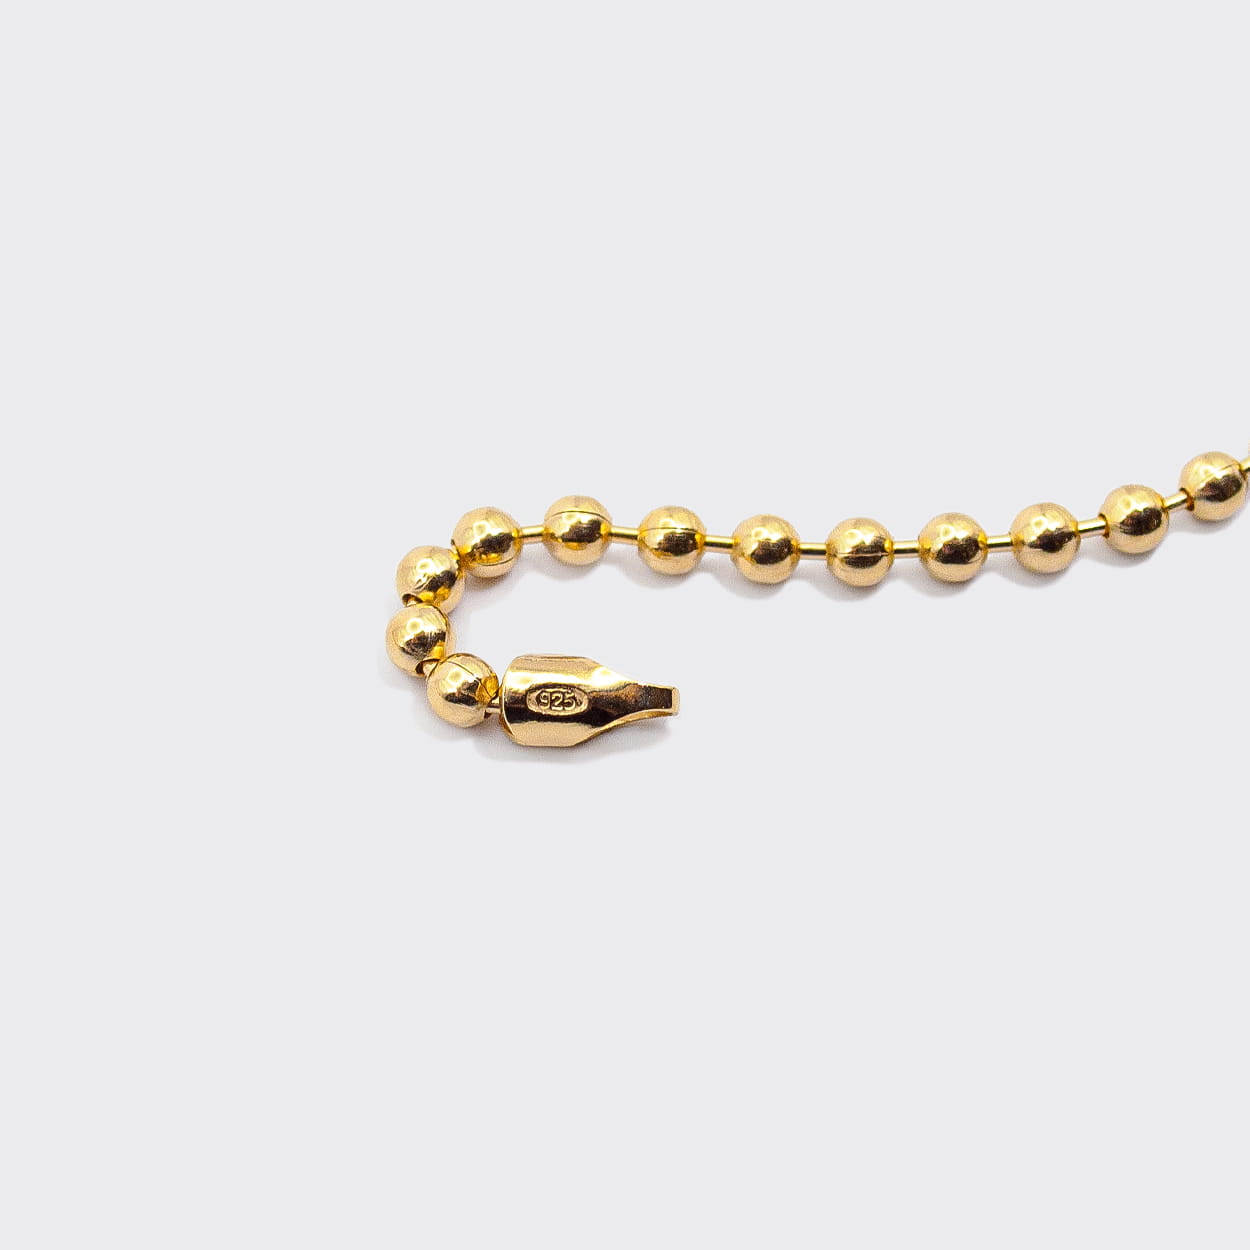 The beads bracelet is an elegant and unisex piece of jewelry, crafted in Italy and made of 925 Sterling Silver with a high-quality 18 karat gold plating. Every jewelry is designed by Atelier Domingo's in France and is made to be worn by both men and women.